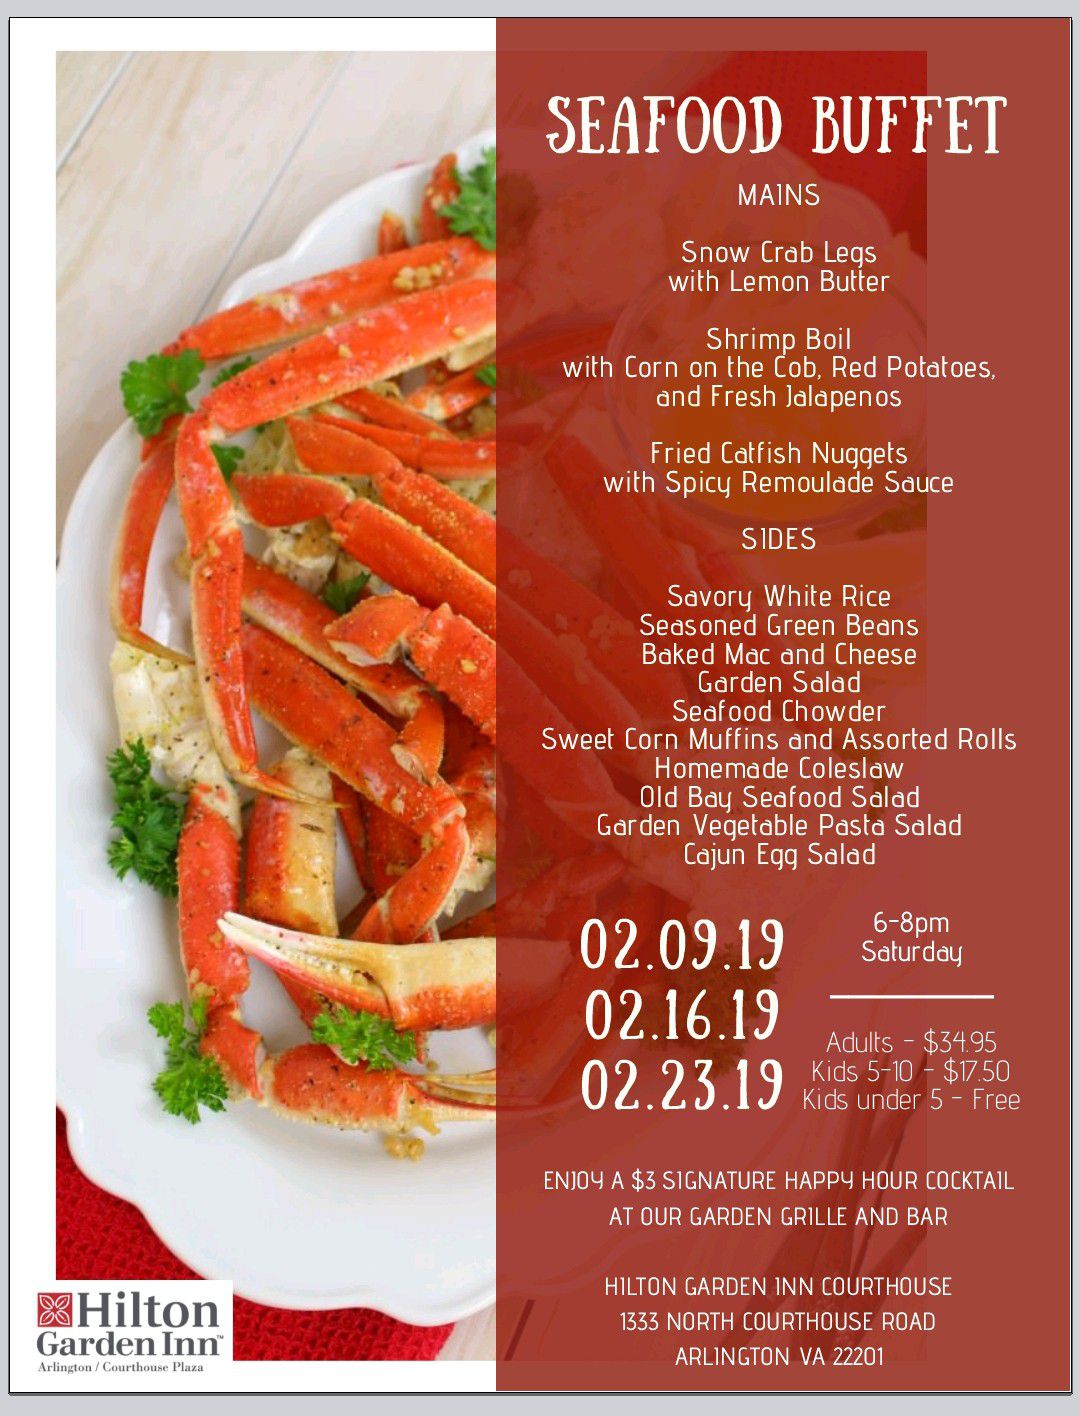 Seafood Buffet Event